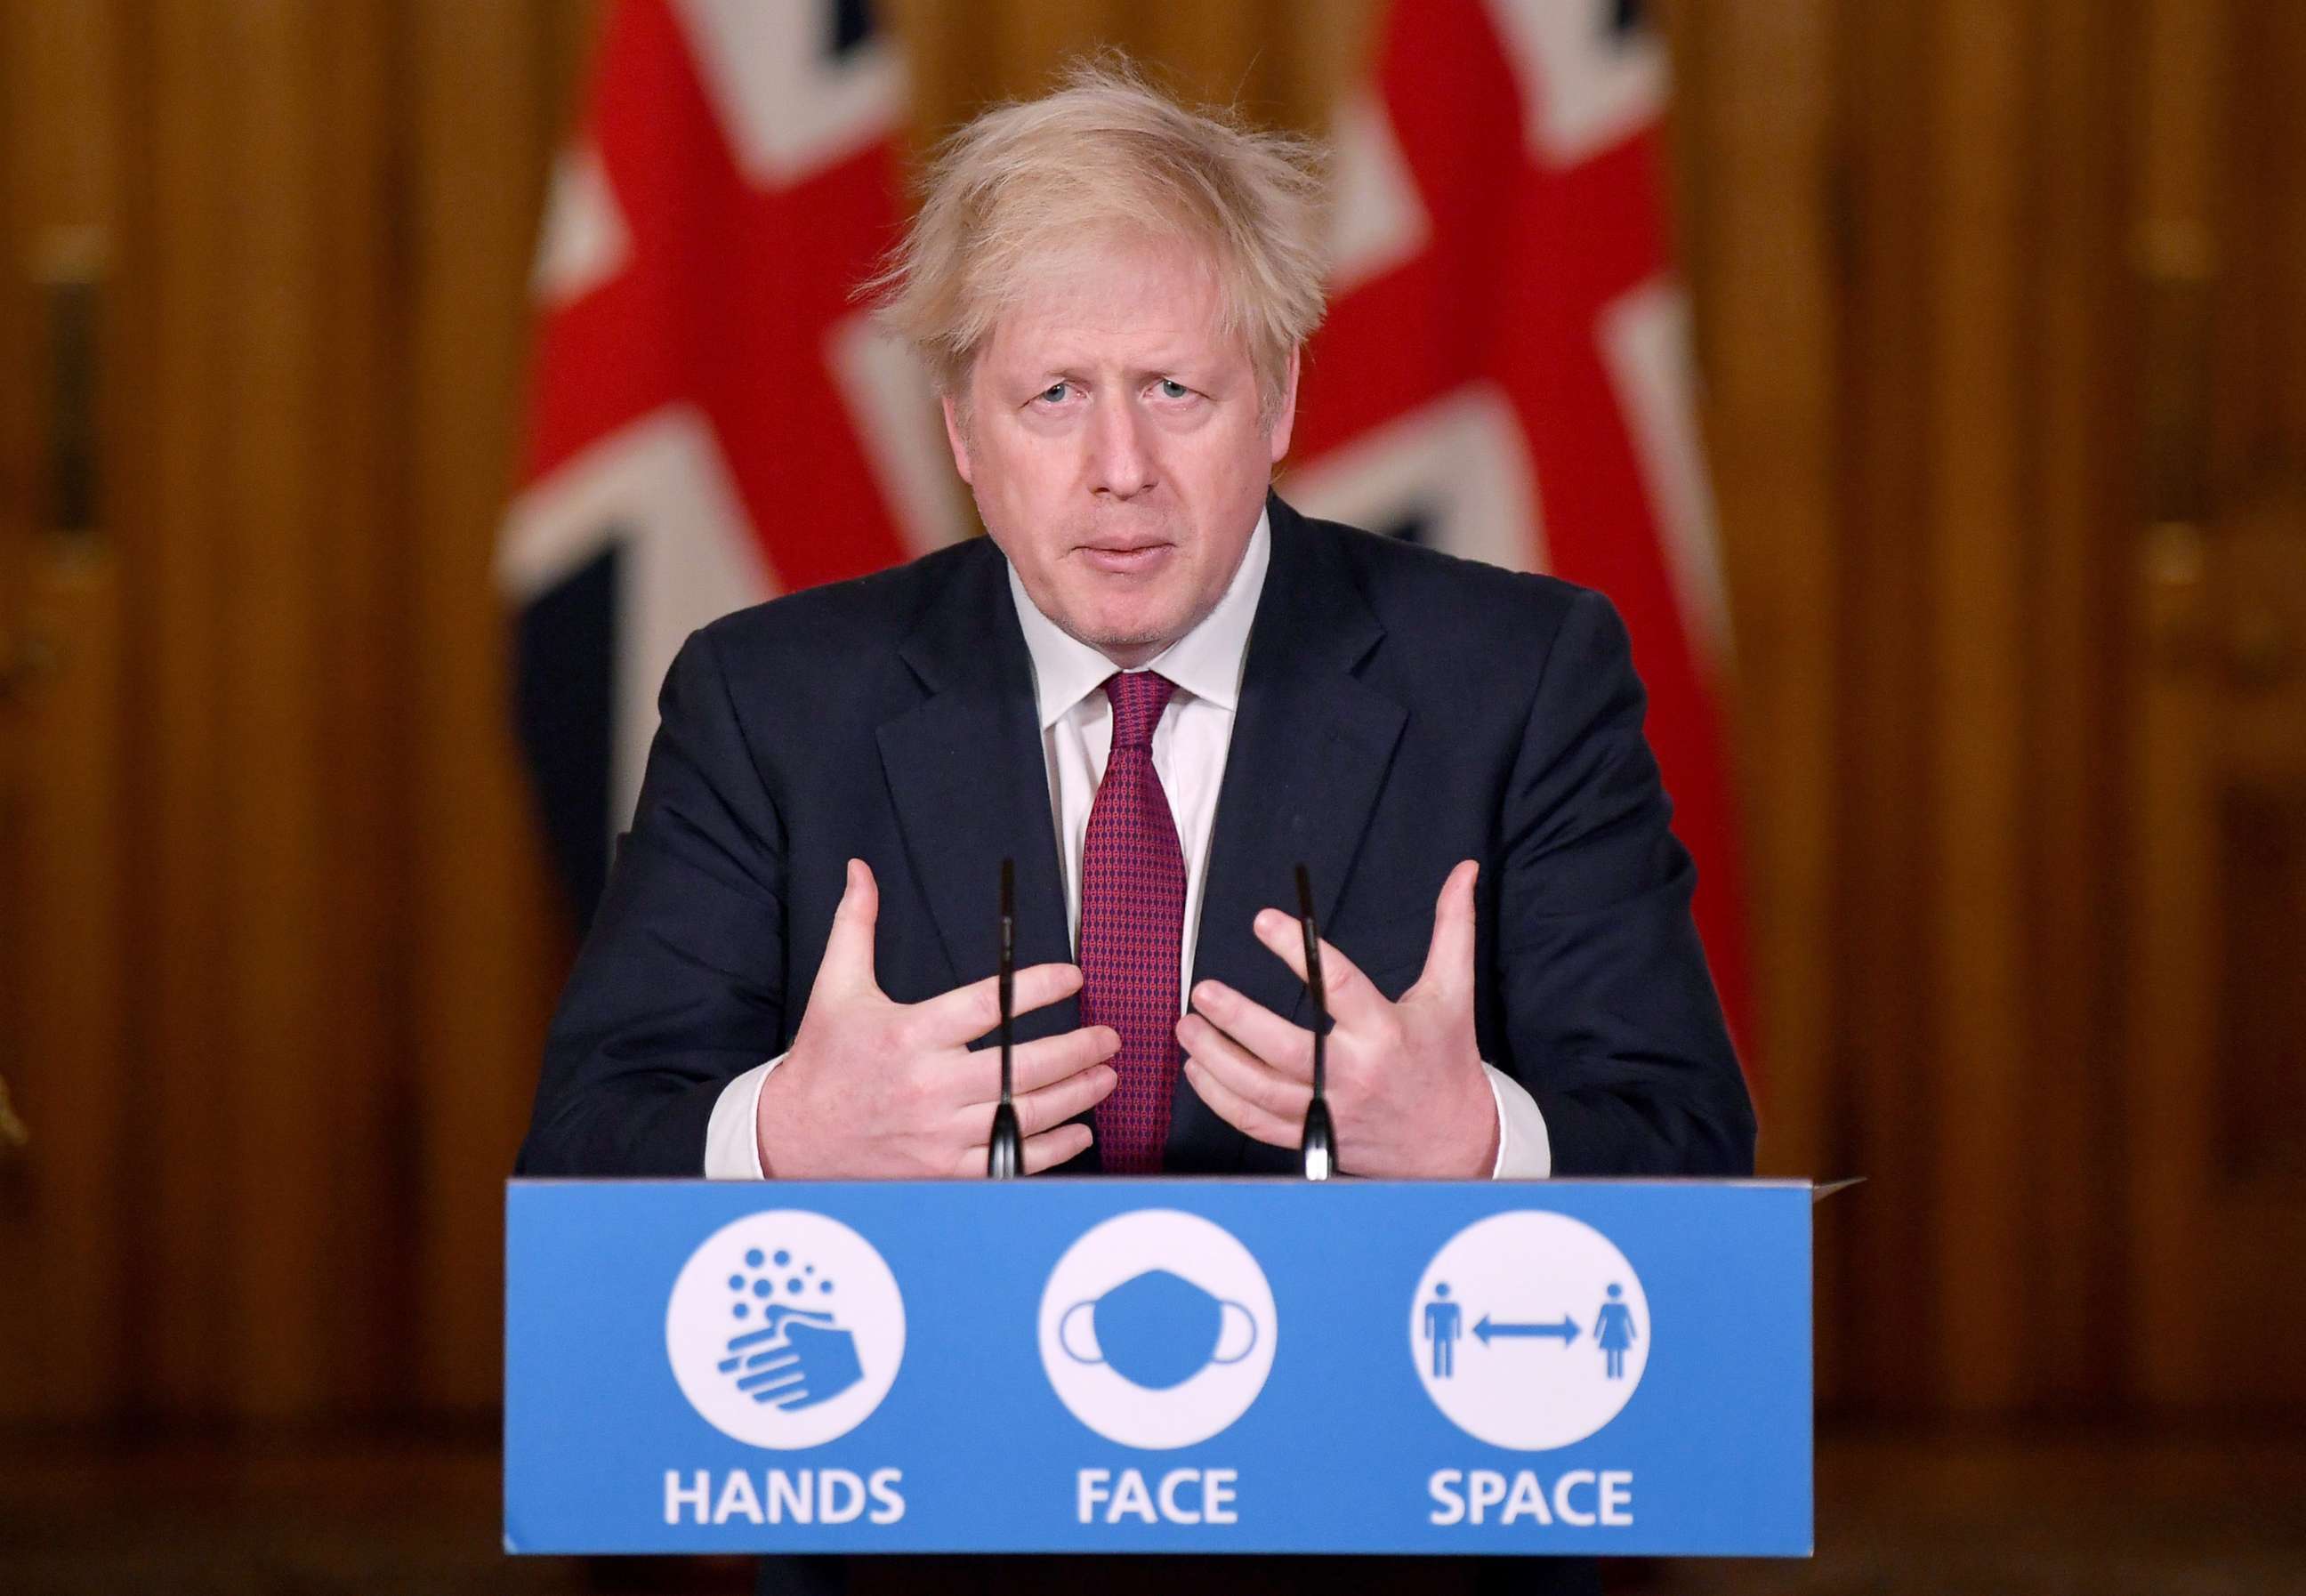 PHOTO: Britain's Prime Minister Boris Johnson speaks during a news conference in response to the ongoing situation with the coronavirus disease pandemic on Dec. 19, 2020 in London.